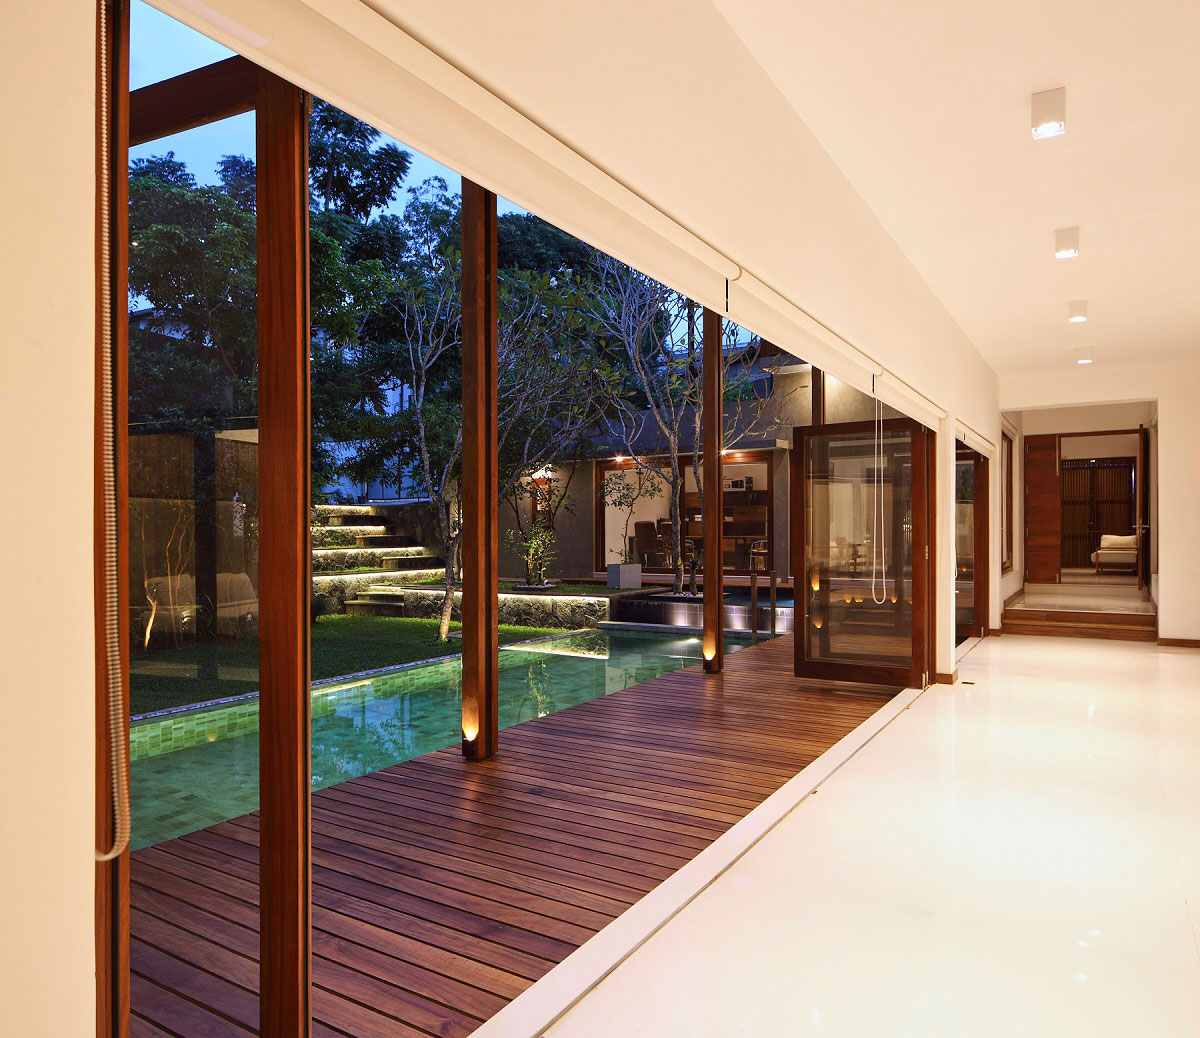 House at Anderson Road | Damith Premathilake Architects